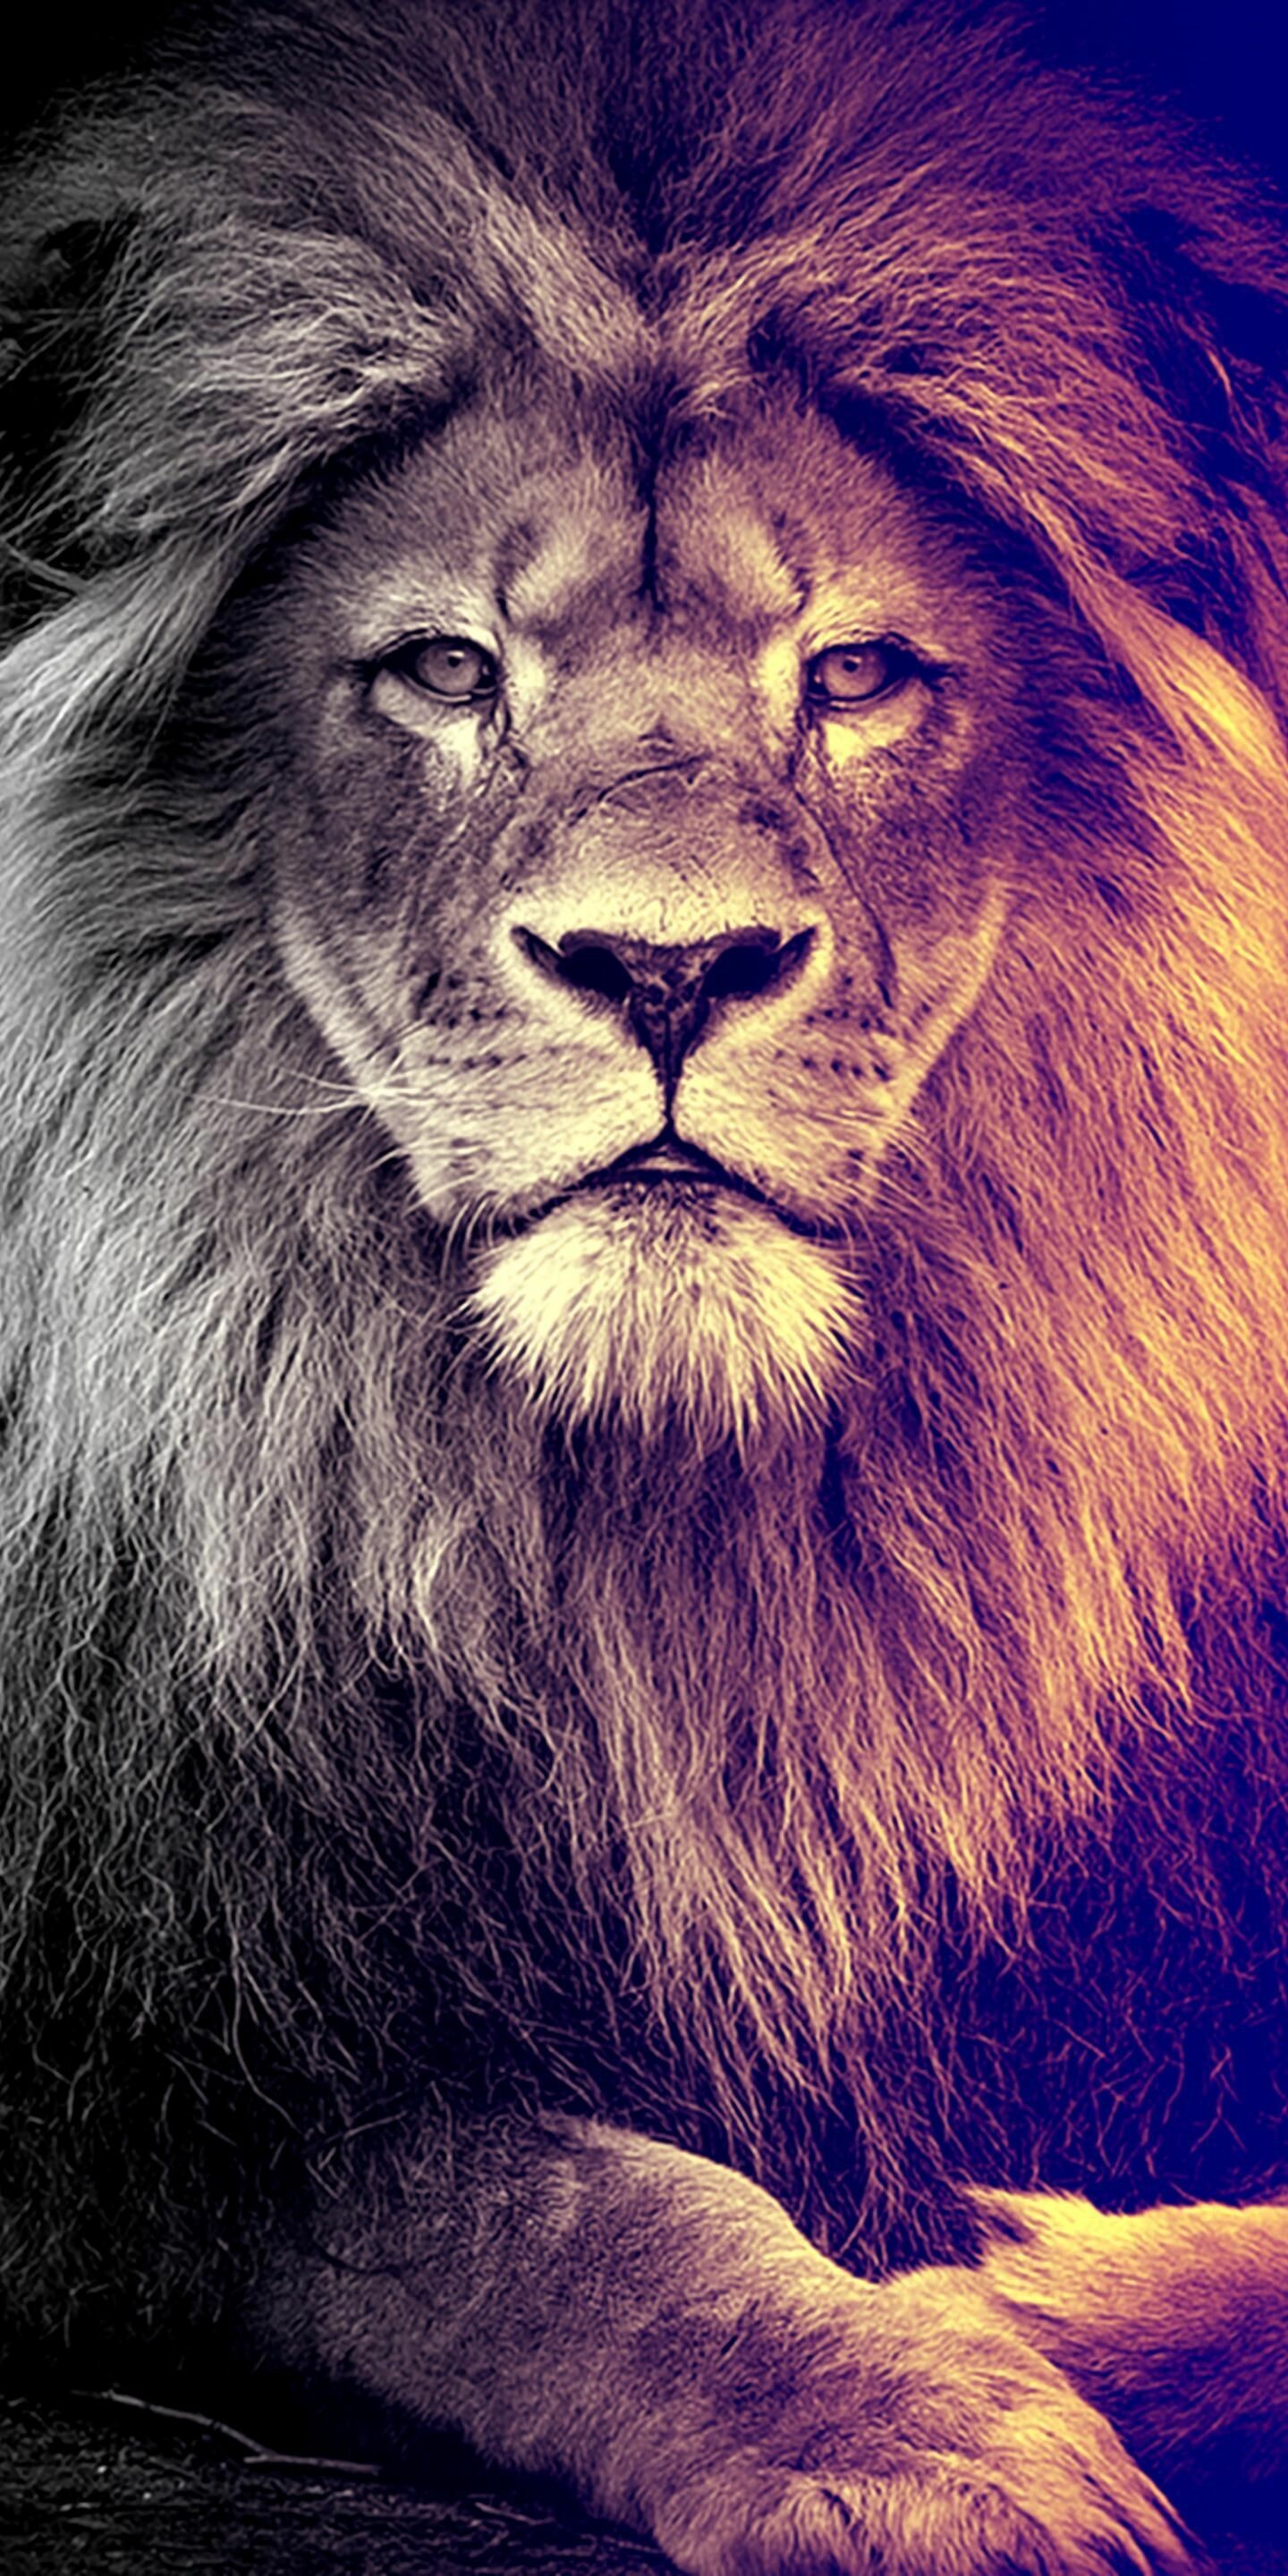 HD wallpaper, Urban Style, Hip Hop Inspiration, Iphone Hd Lion Wallpaper Image, 1440X2880 Hd Phone, Dope Lion Wallpapers, Artistic Expression